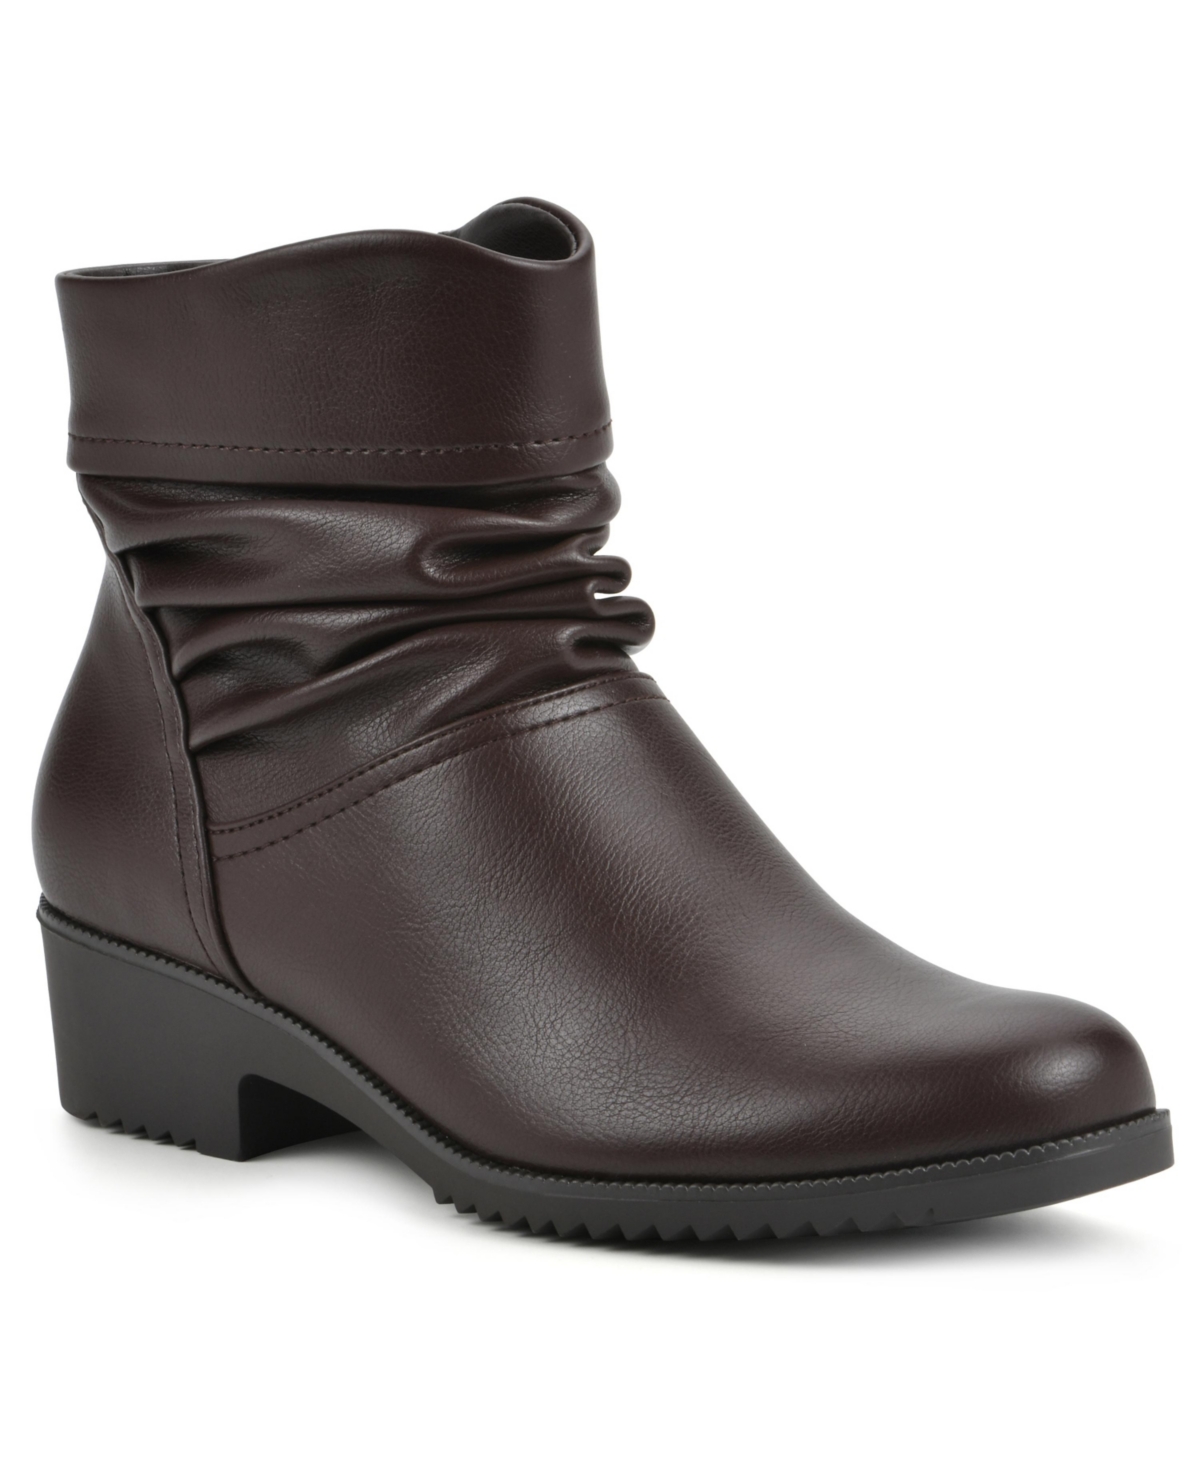 Women's Durbon Ankle Boot - Brown